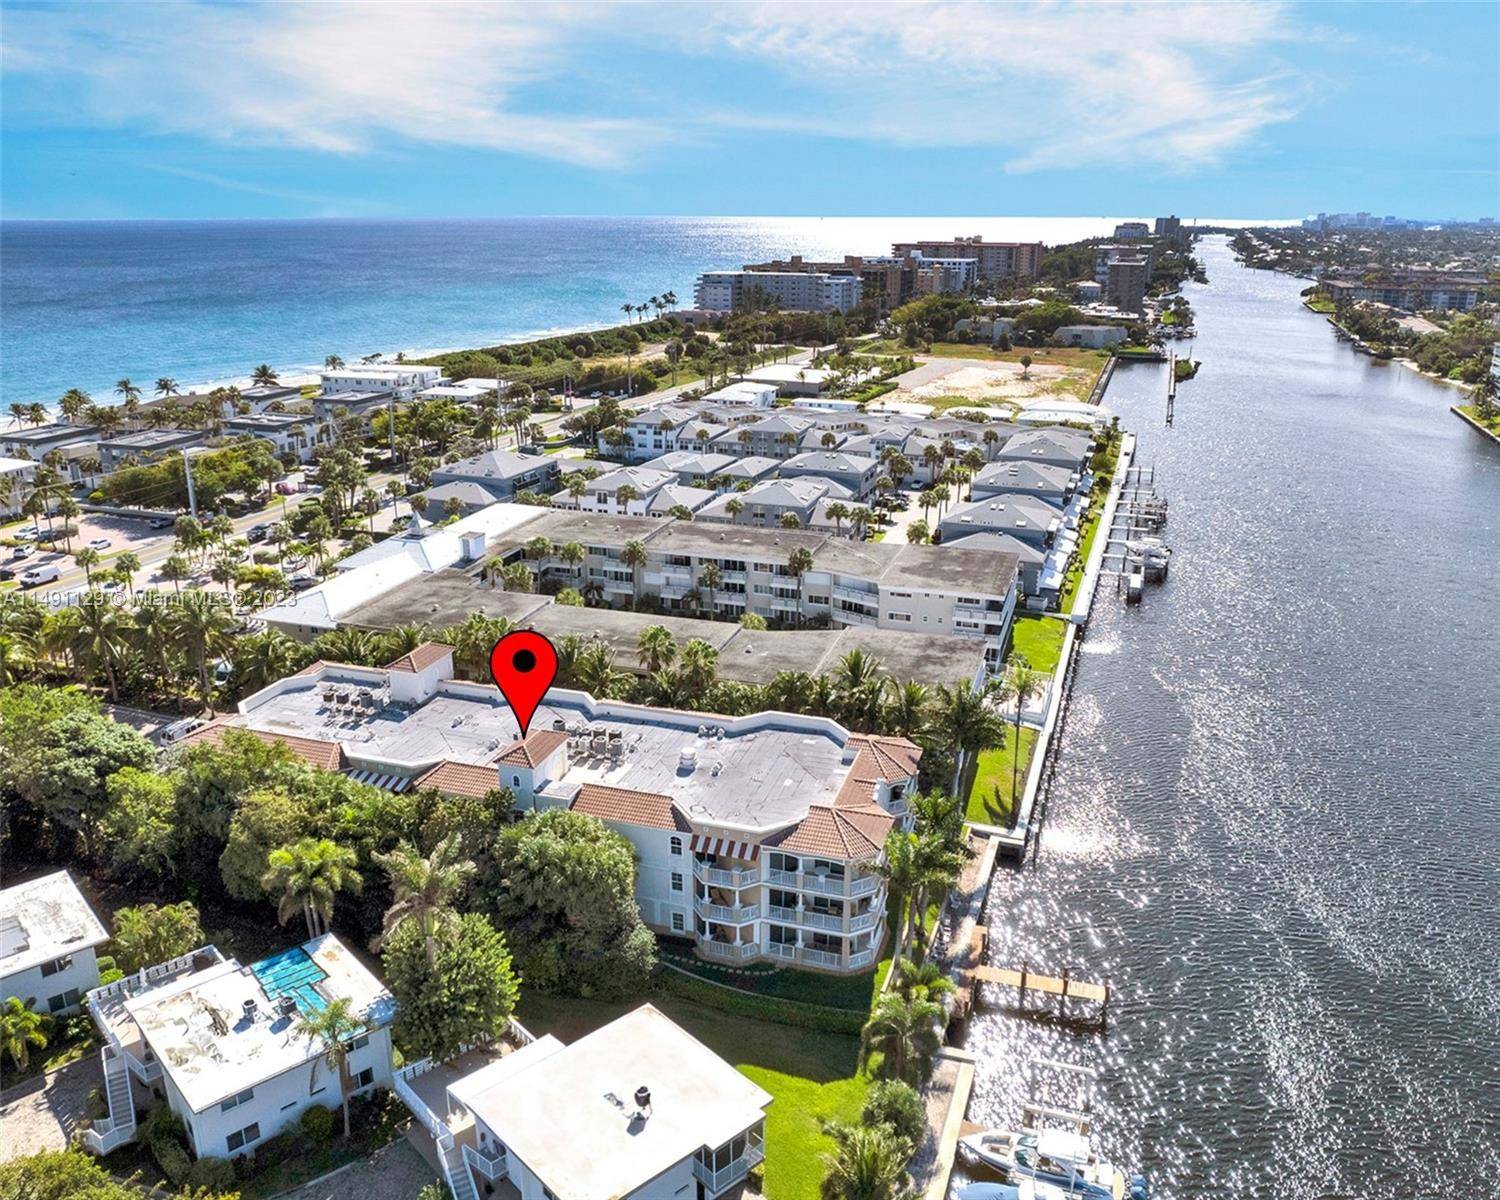 This Mediterranean style condo located on the INTRACOASTAL offers direct access to a PRIVATE BEACH across the street.